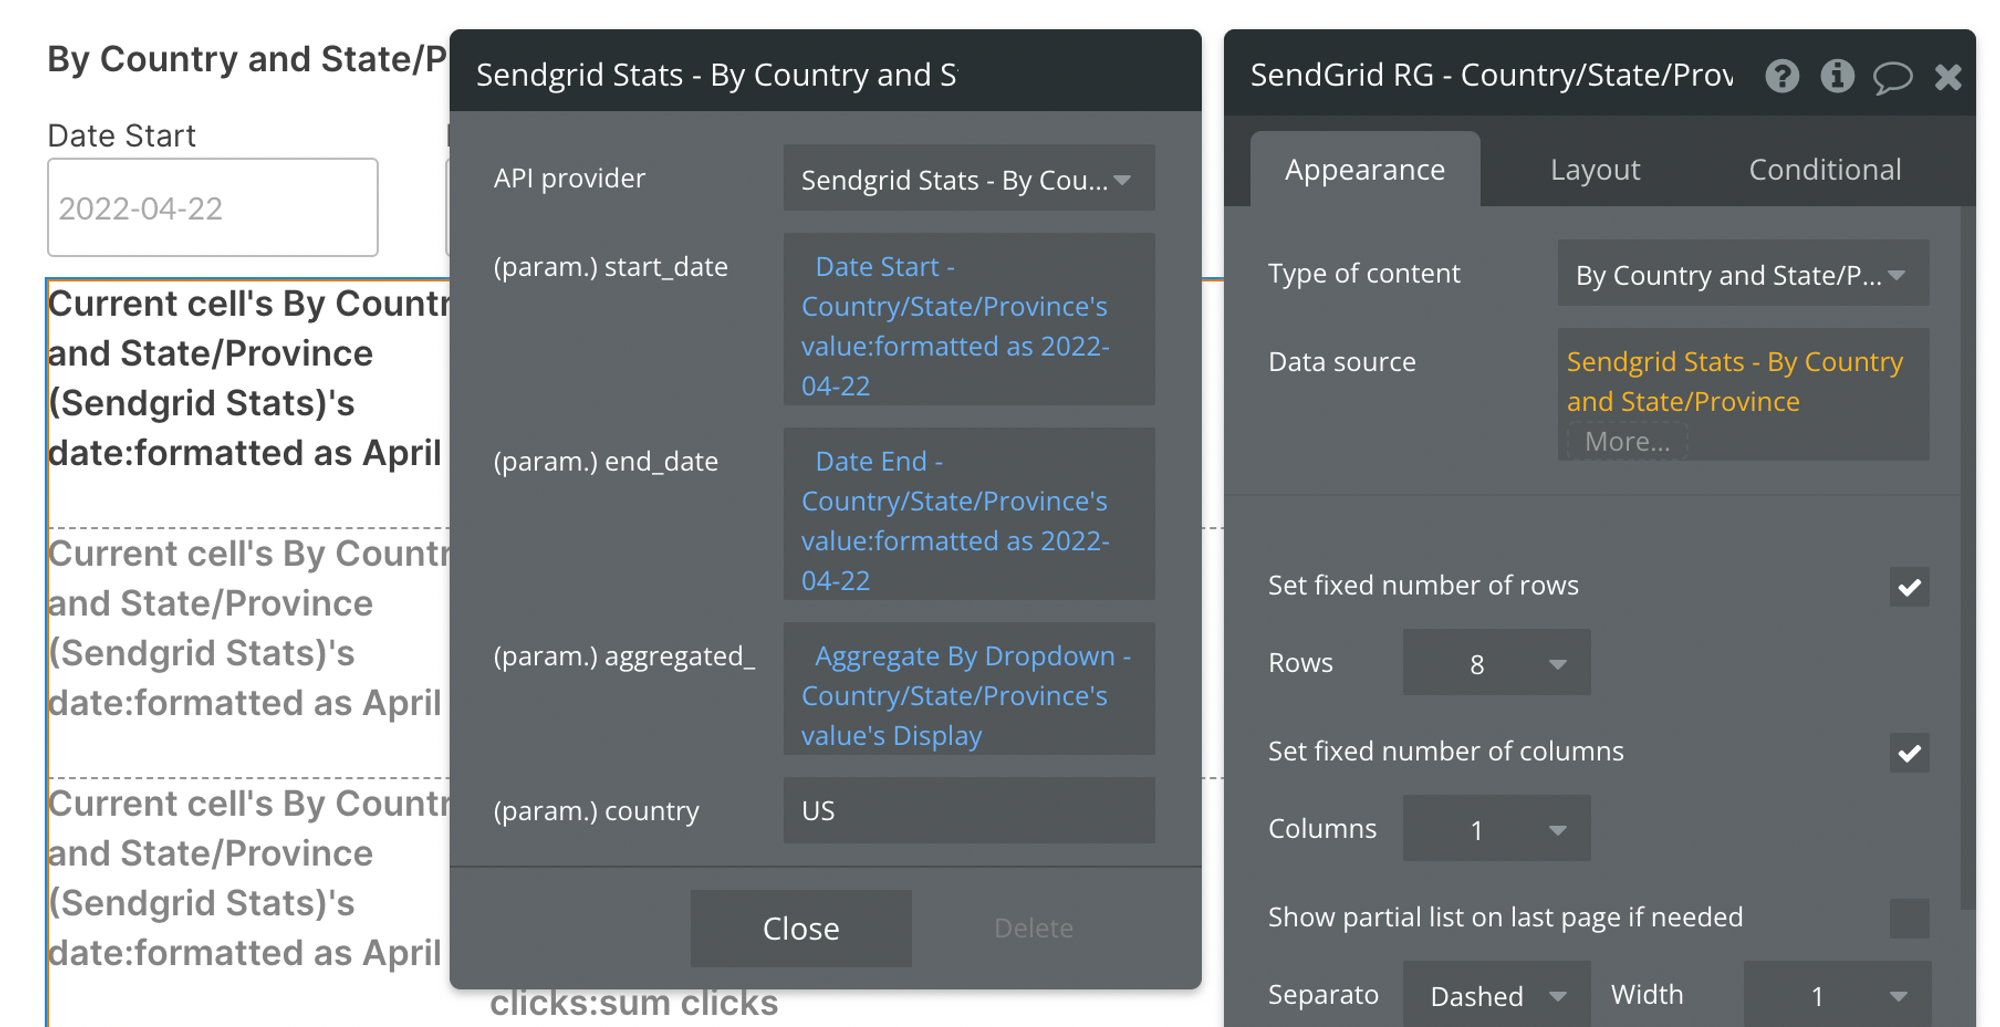 Select Sendgrid Stats - By Country and State/Province from the API provider dropdown